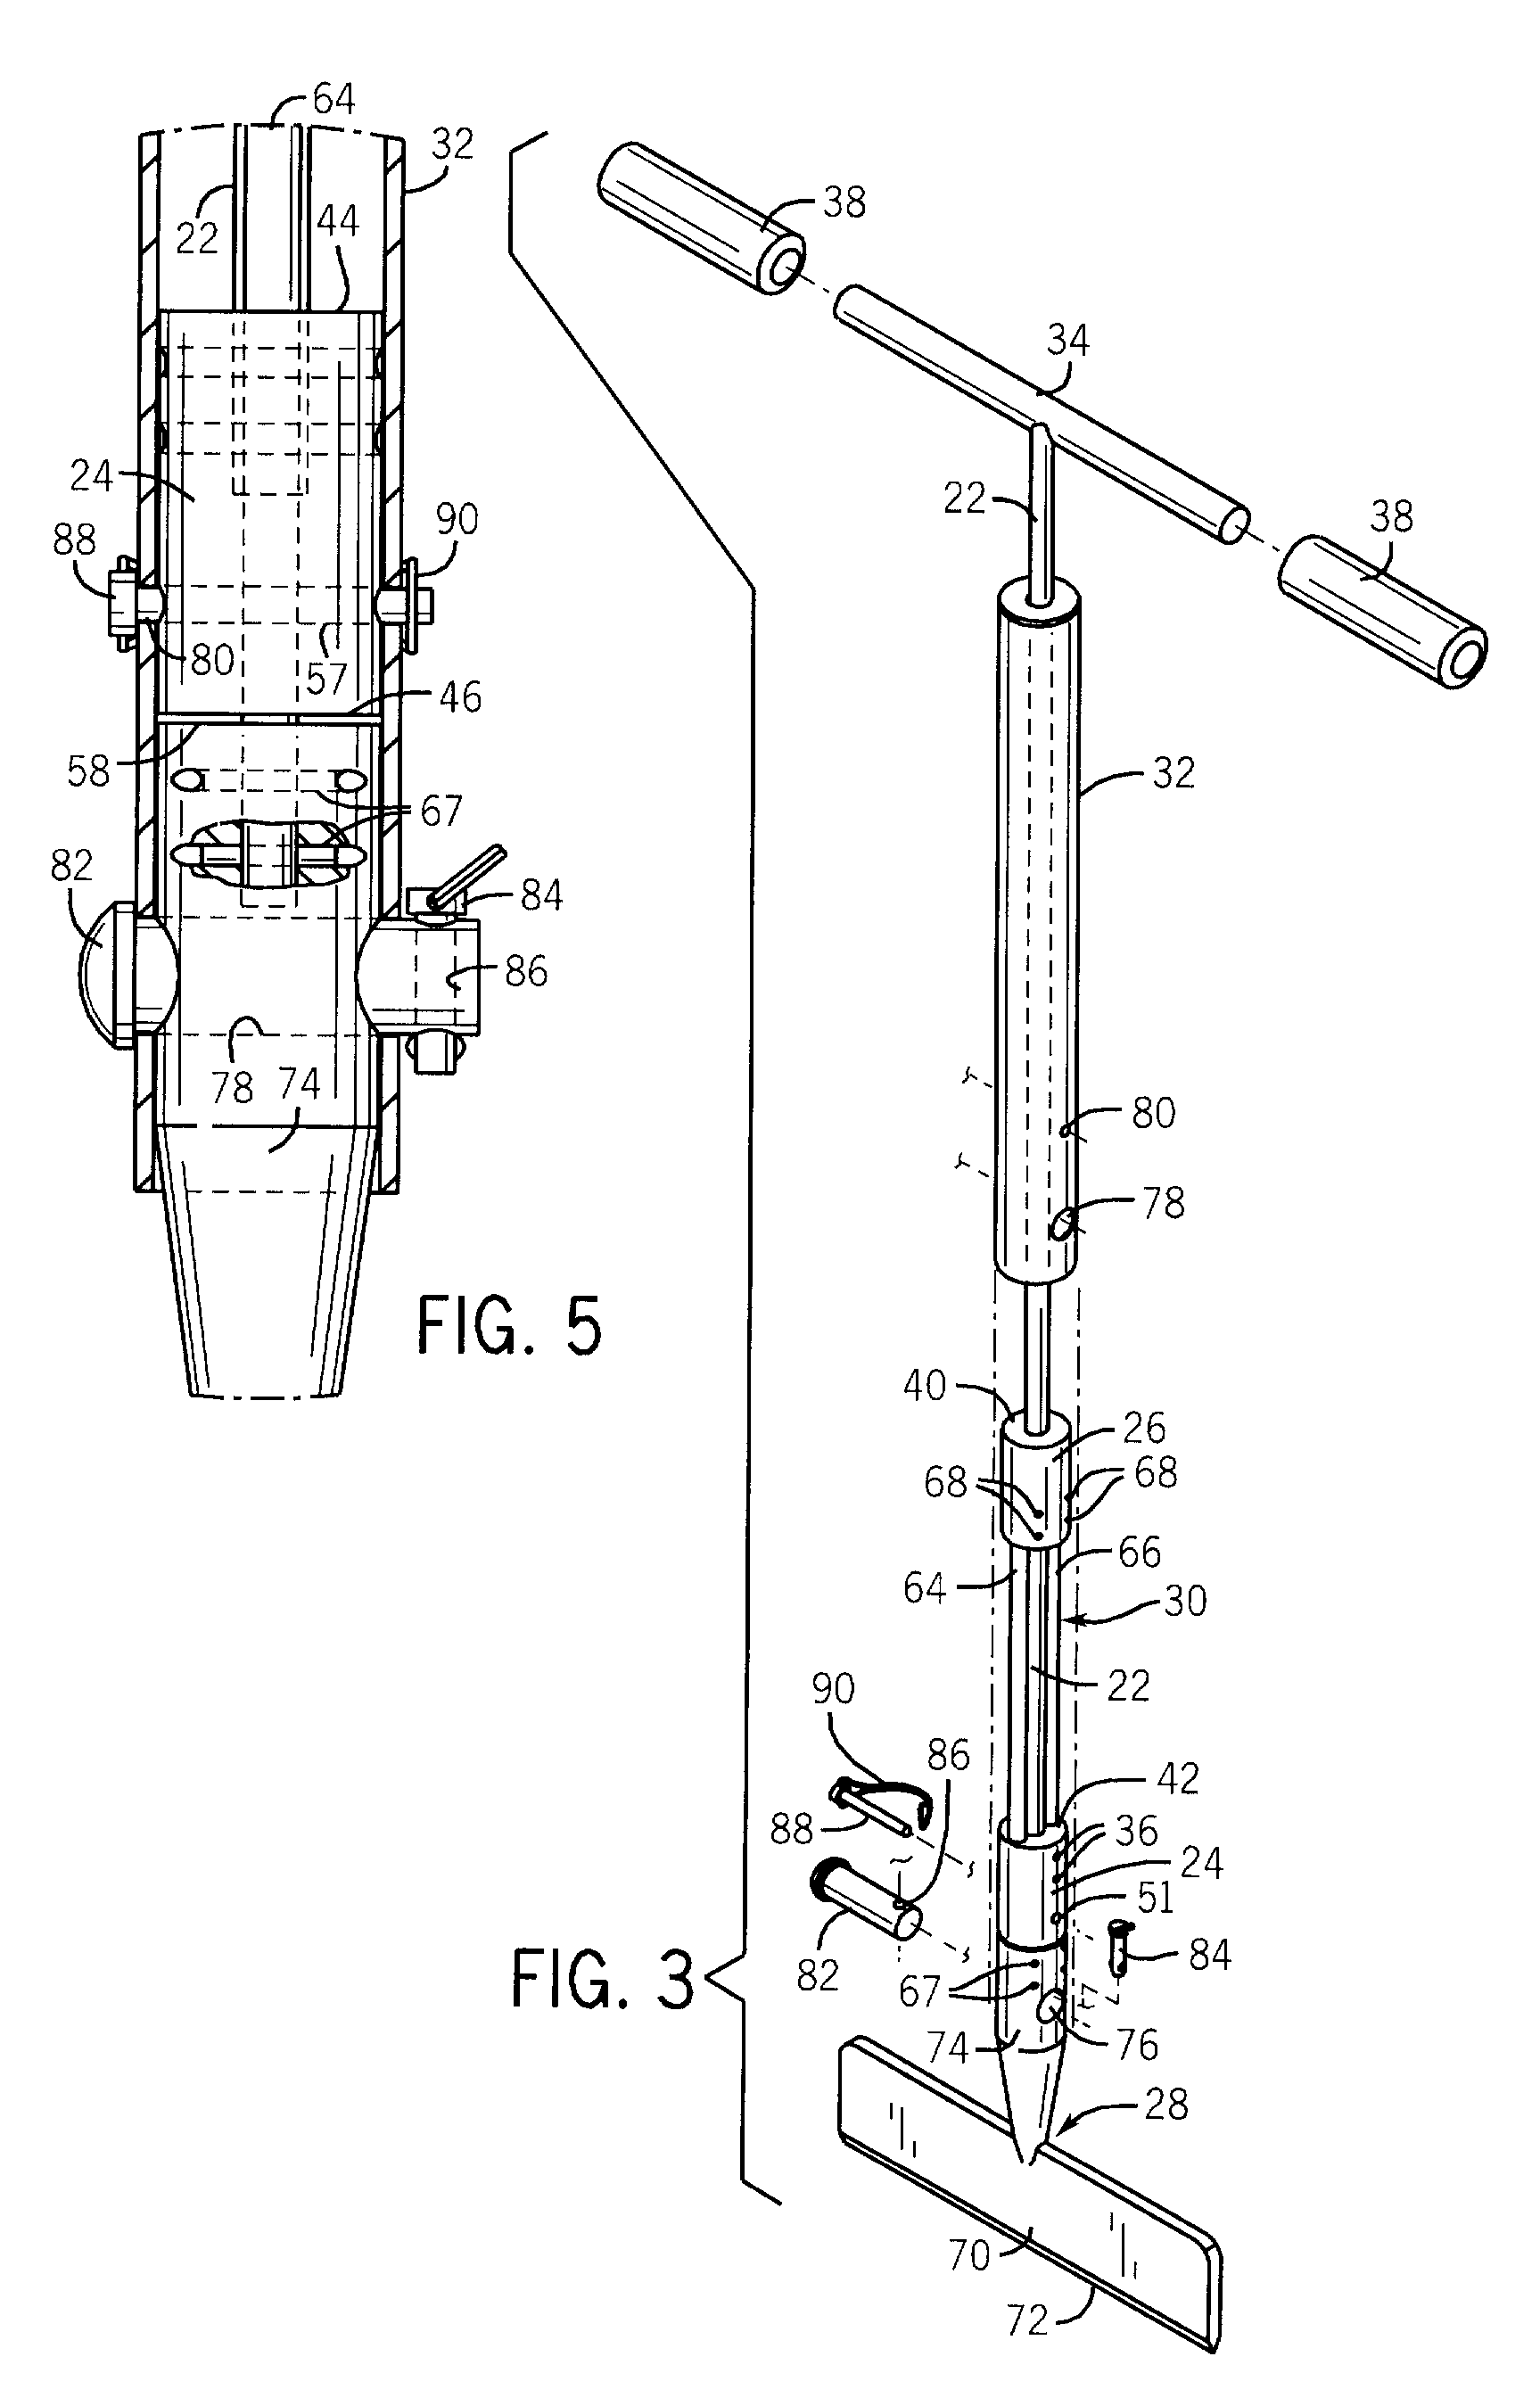 Floor covering removal and impact tool